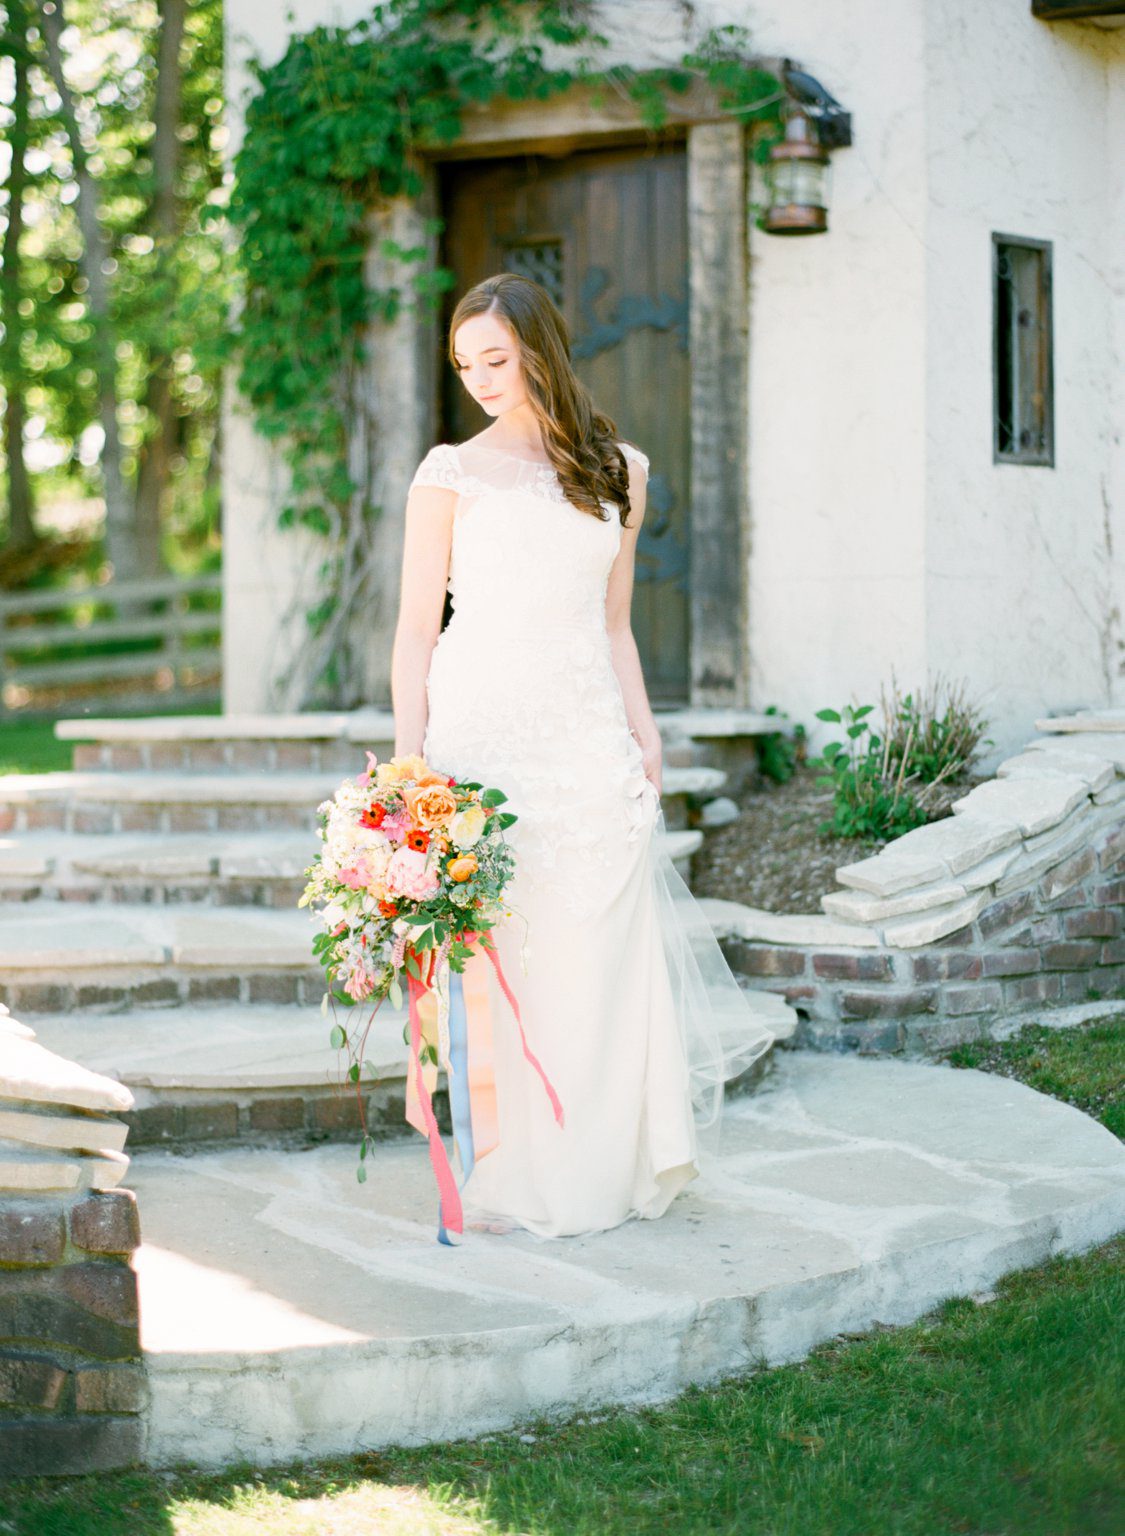 BLOOM Floral Design | Cory Weber Photography | Kate McDonald gown